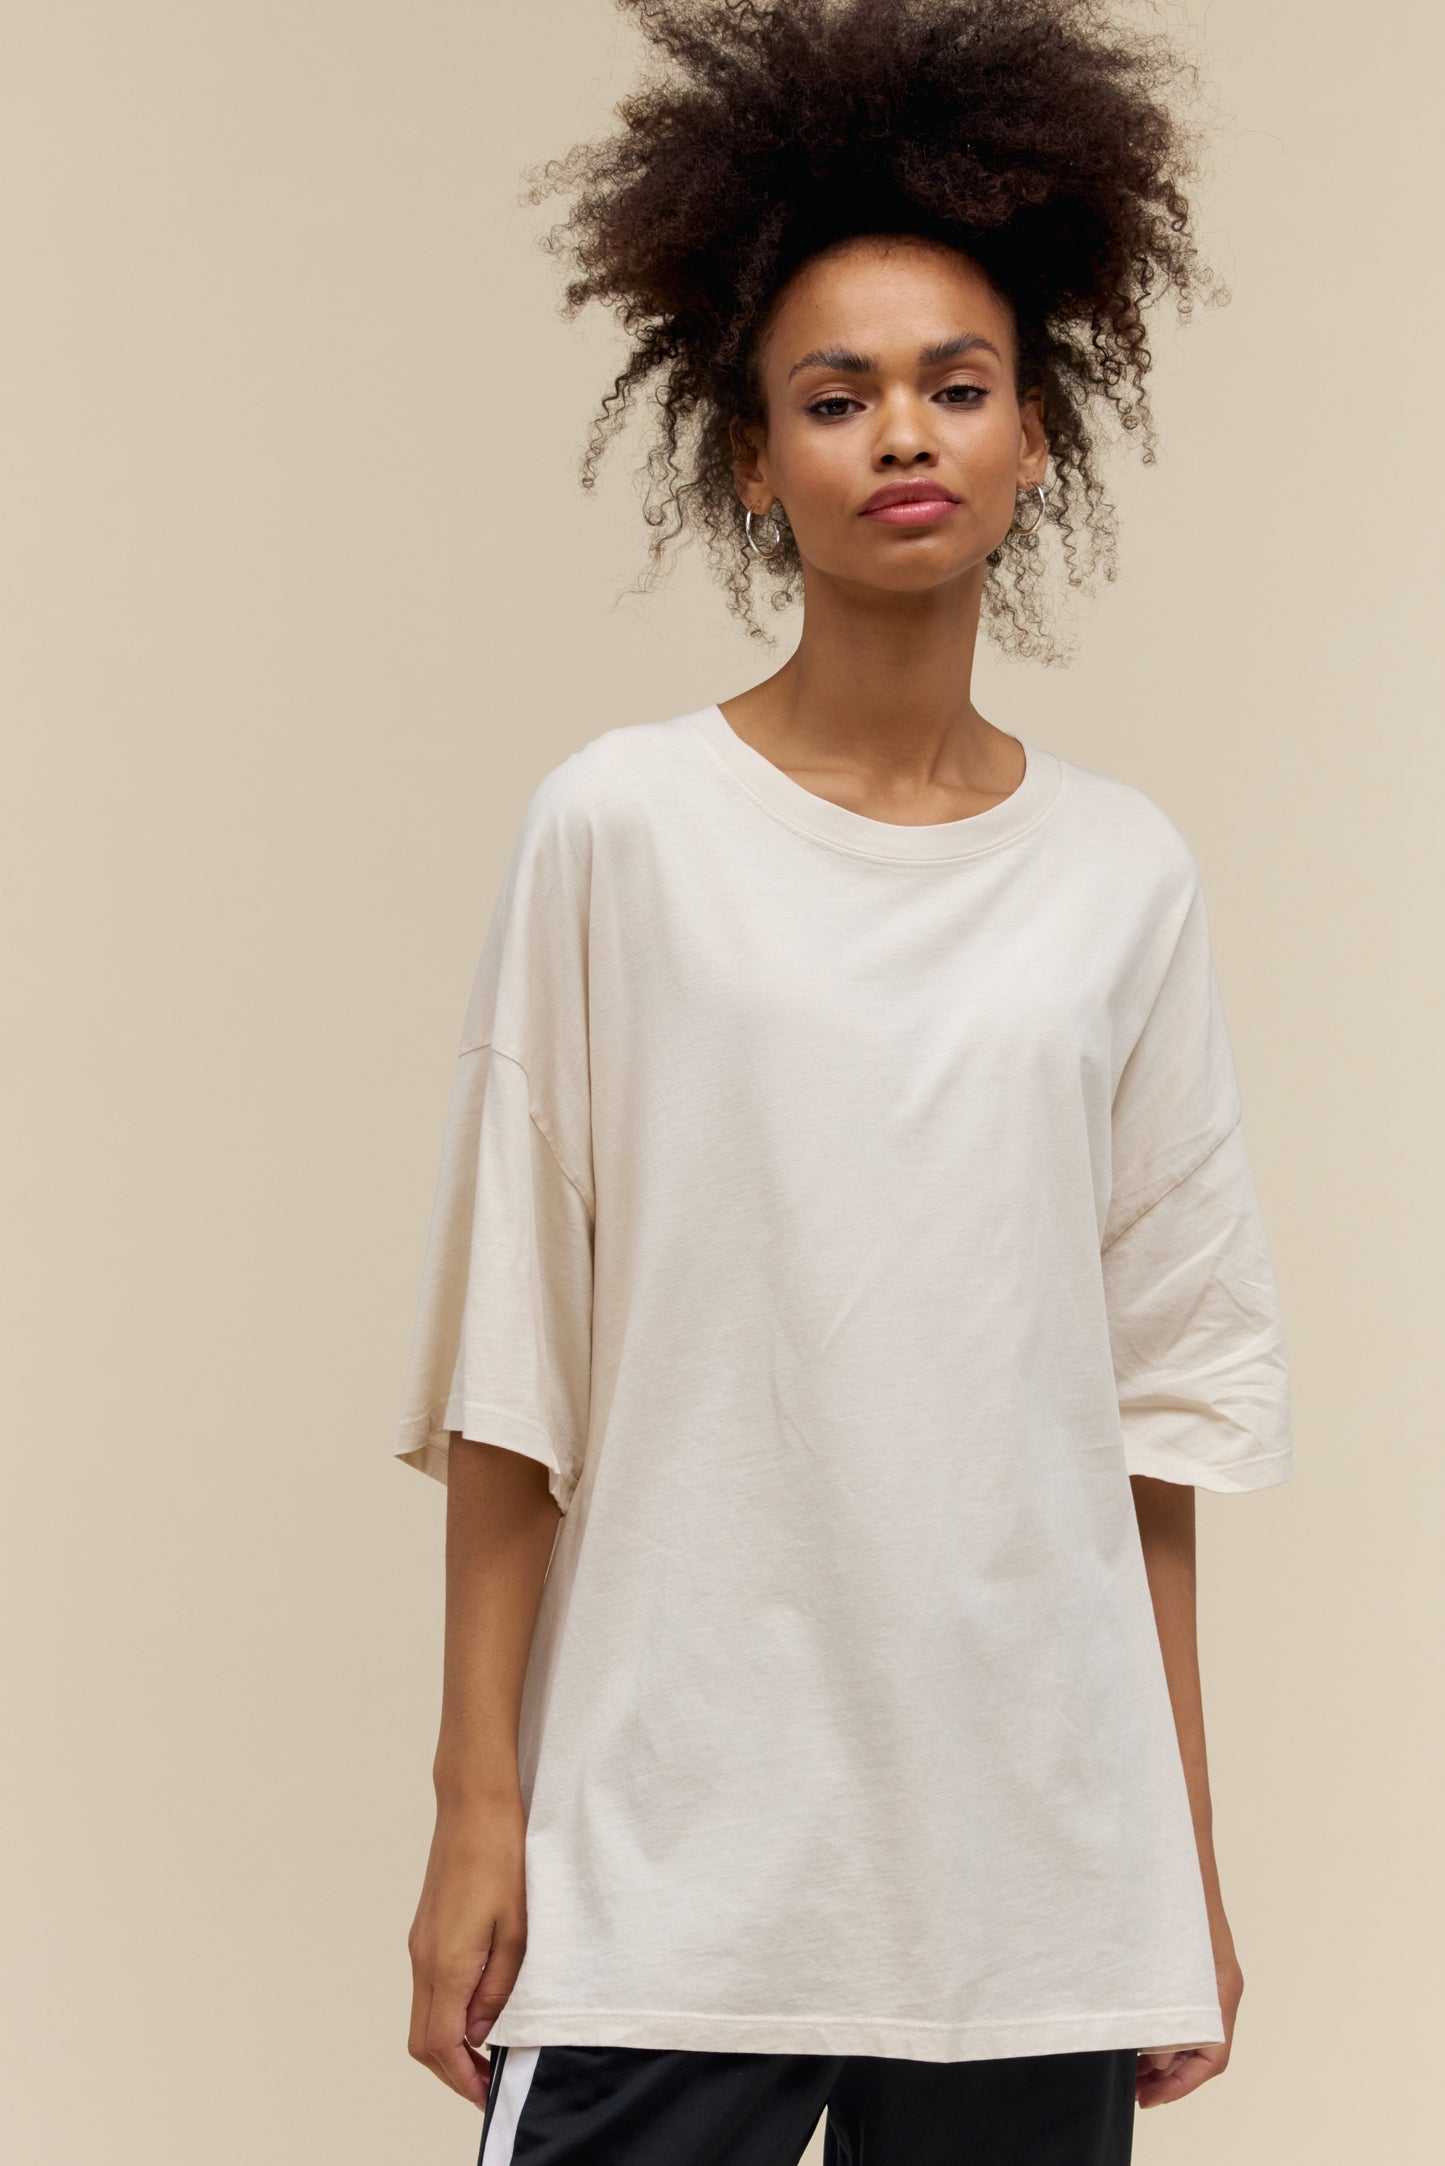 Model wearing a plain t-shirt in dirty white that has an exaggerated oversized fit